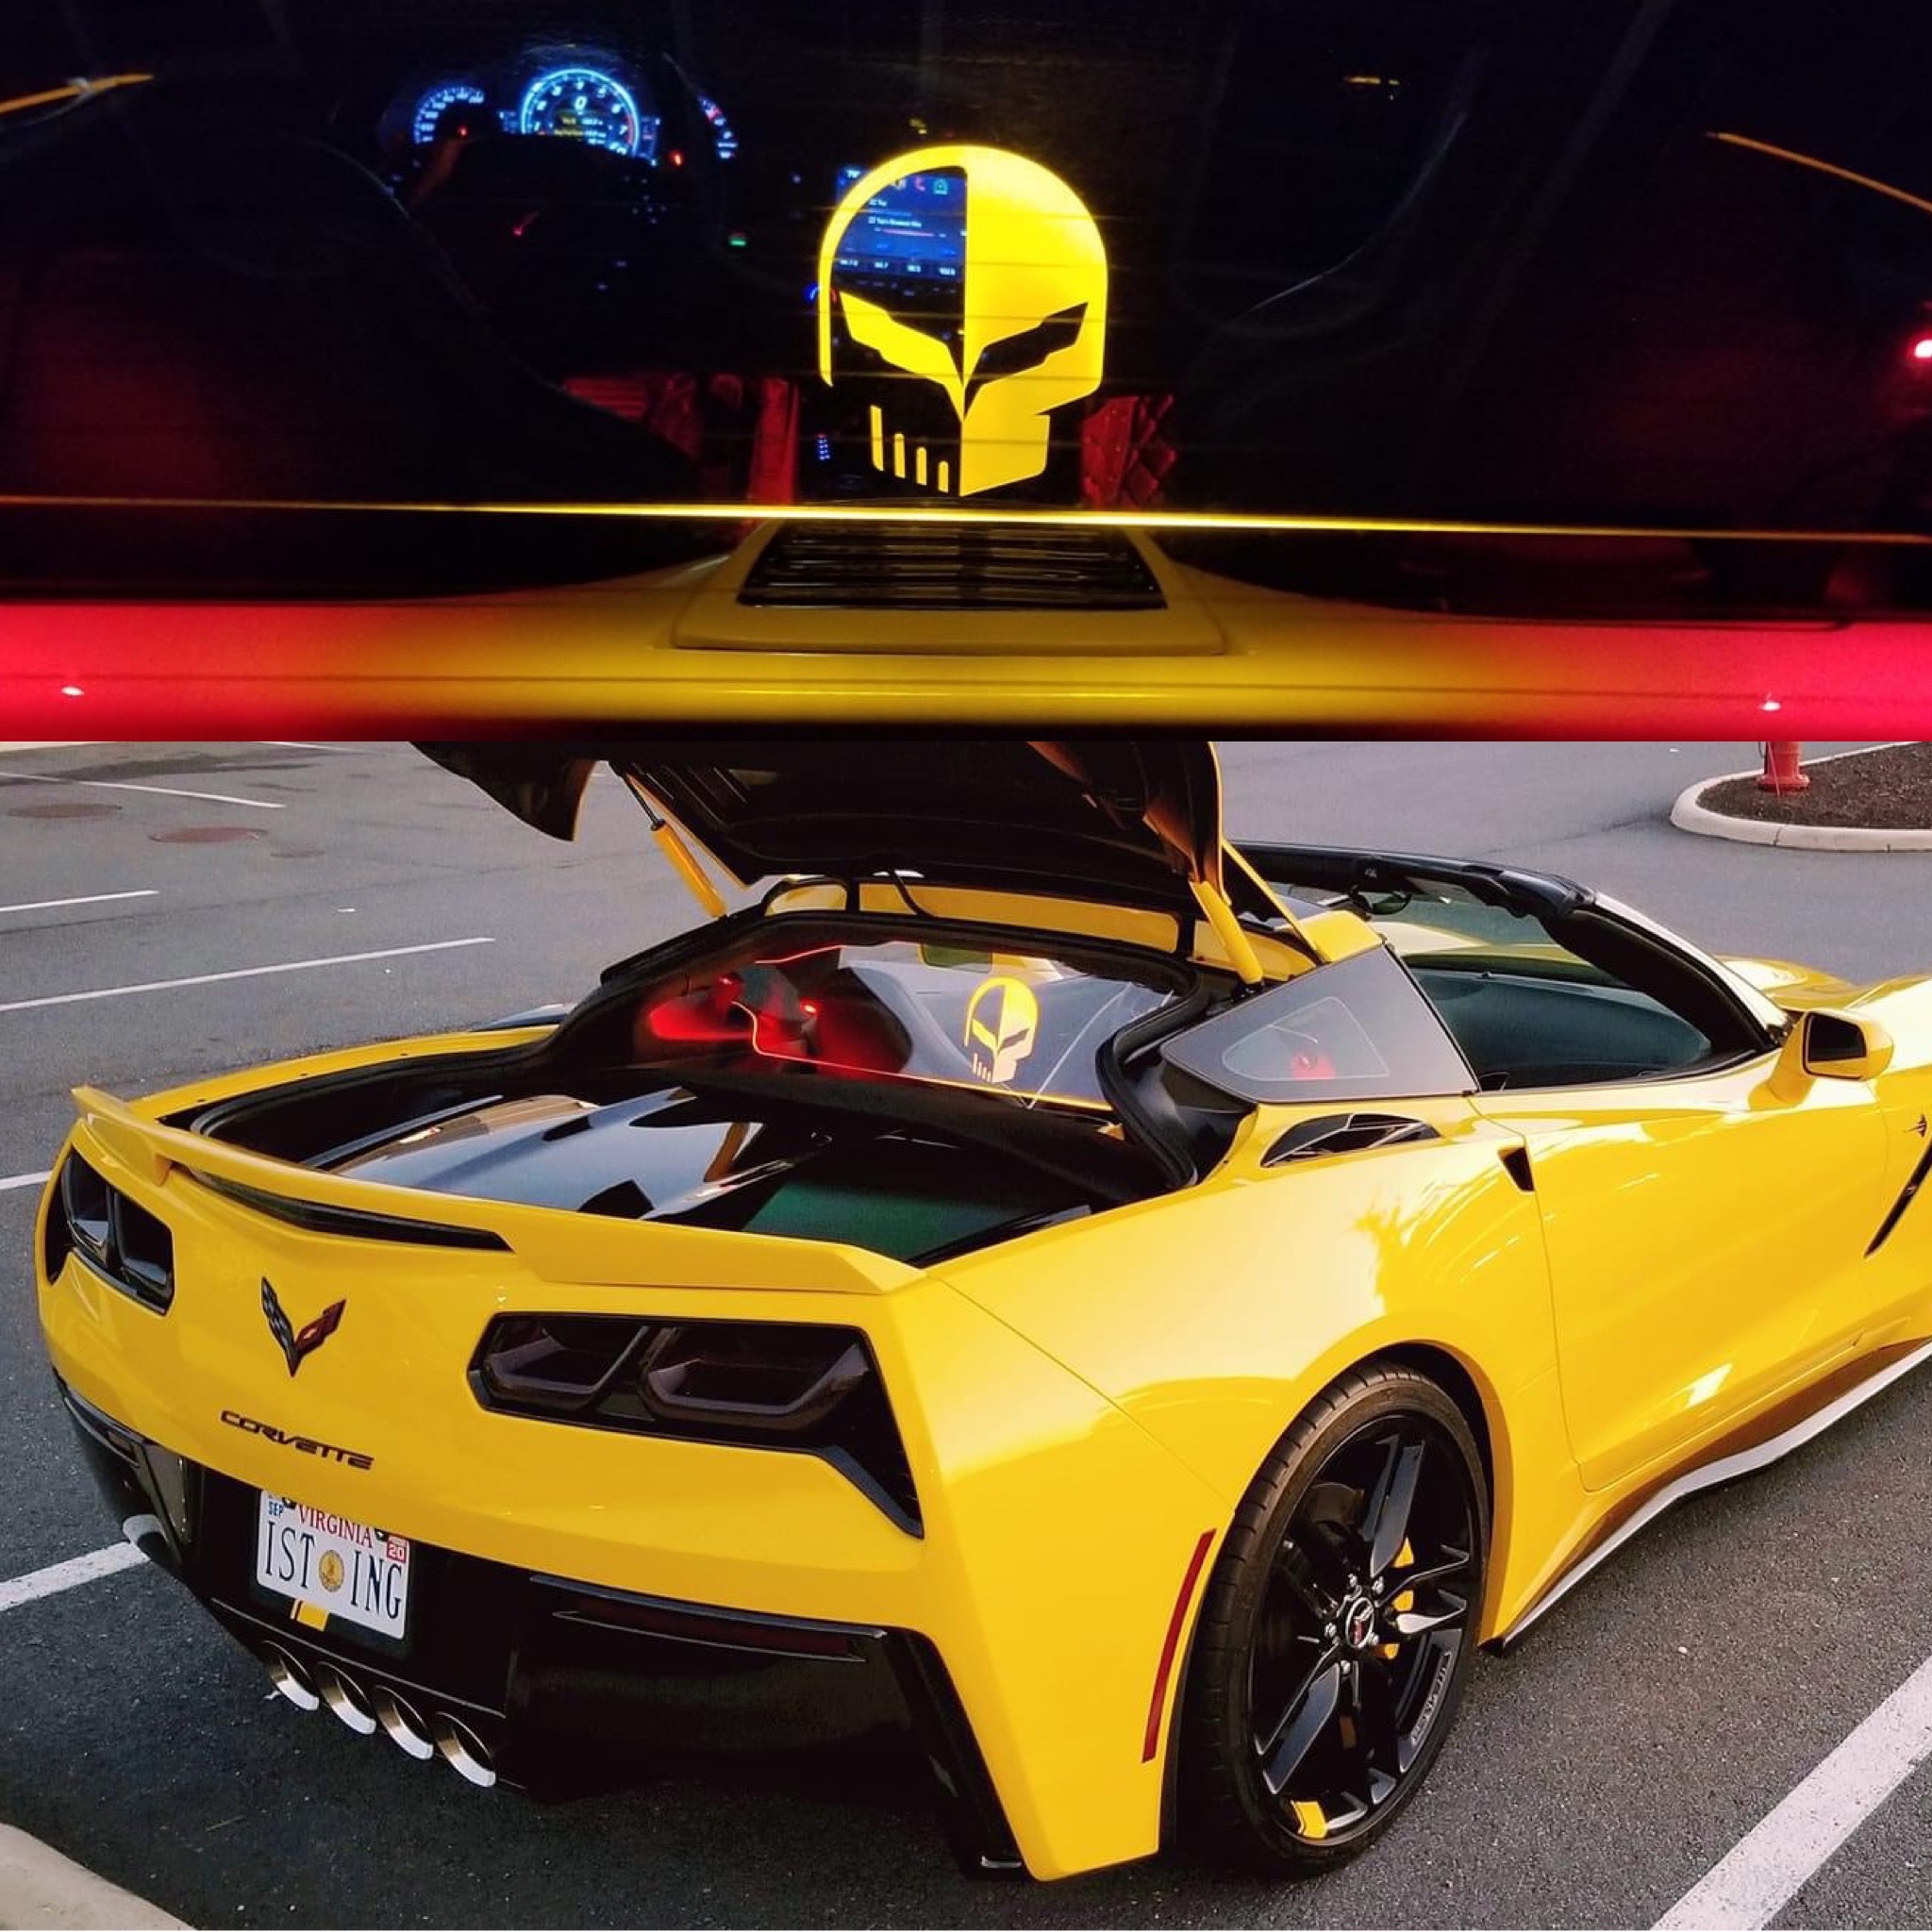 Wind Restrictor LED Wind Deflector for 2014 Present Chevrolet Corvette C7 Convertible with Amber Illuminated Laser Etched Stingray Logo Graphic 